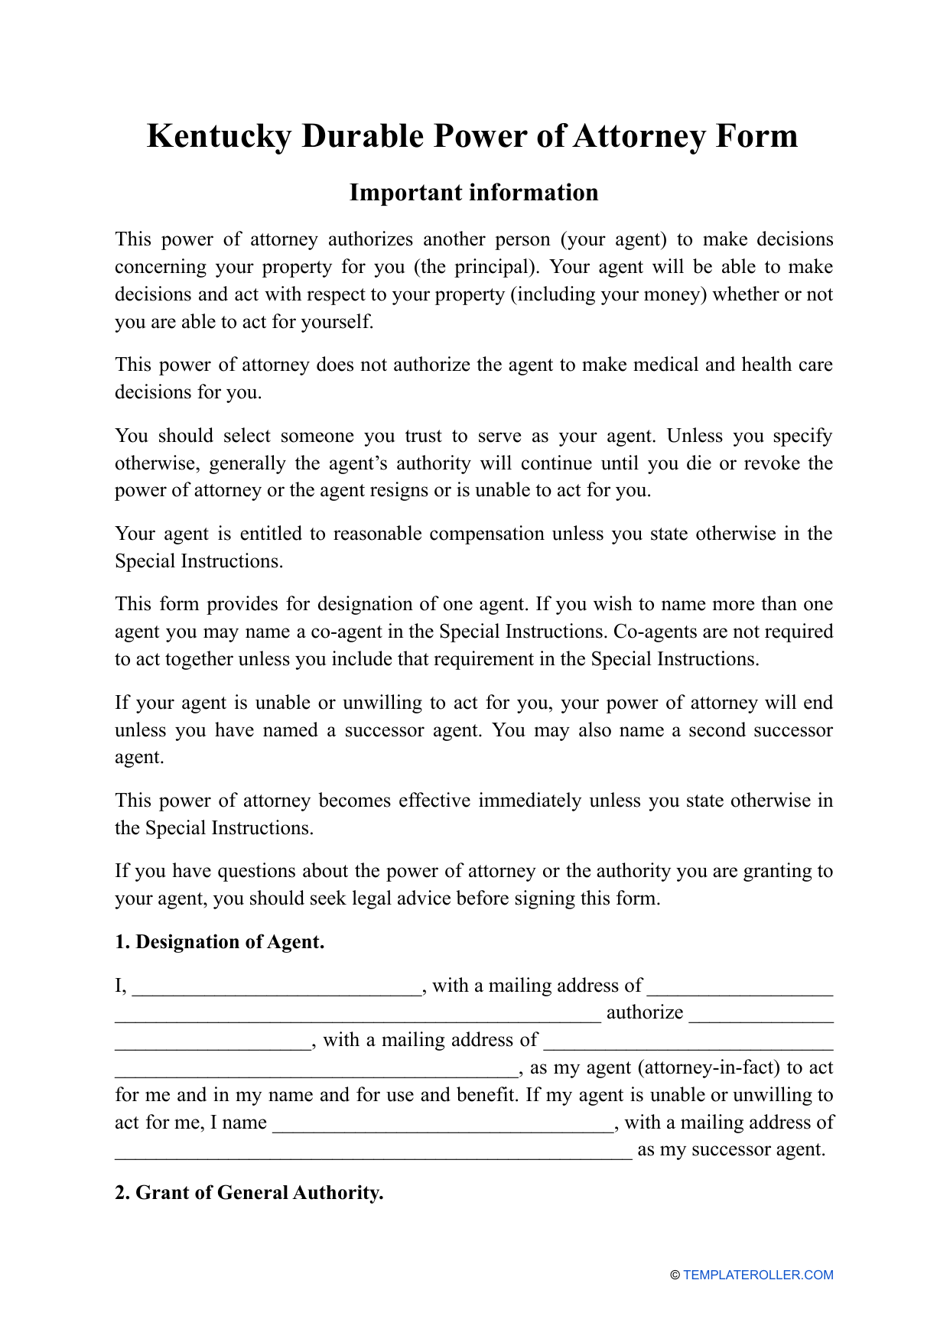 Durable Power of Attorney Form - Kentucky, Page 1